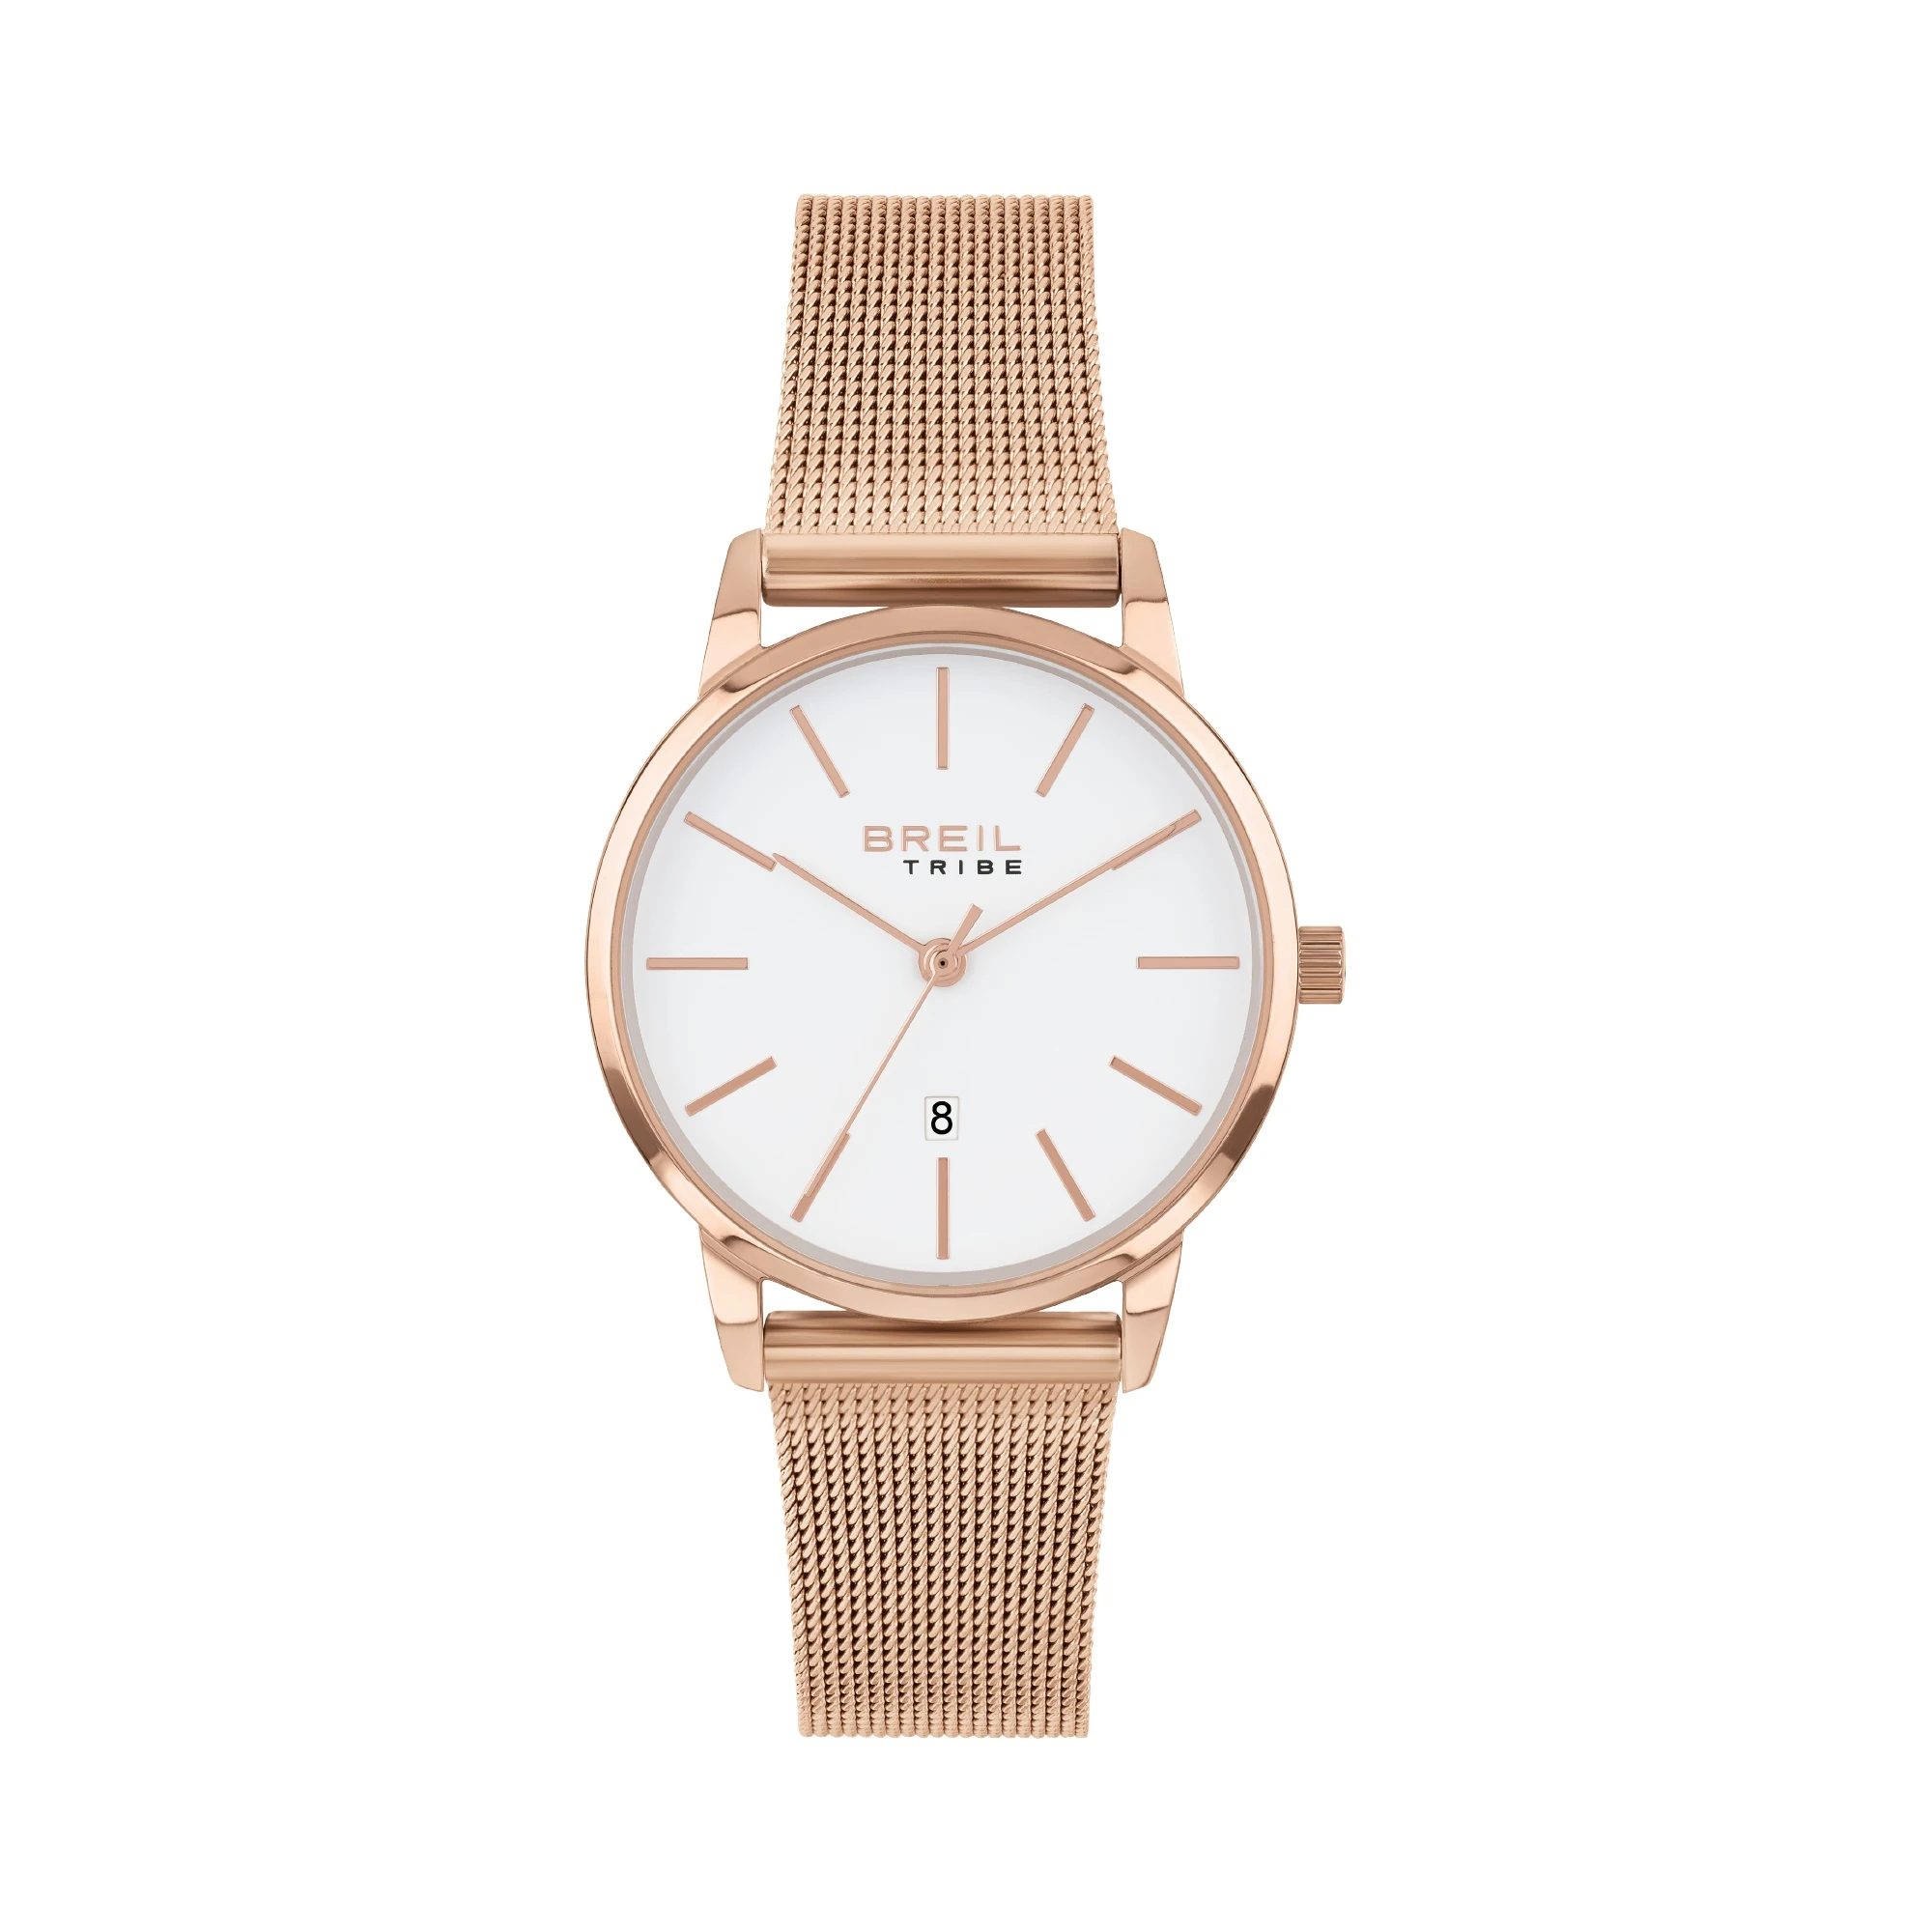 AVERY - TIME ONLY LADY 32 MM - 1 - EW0515 | Breil